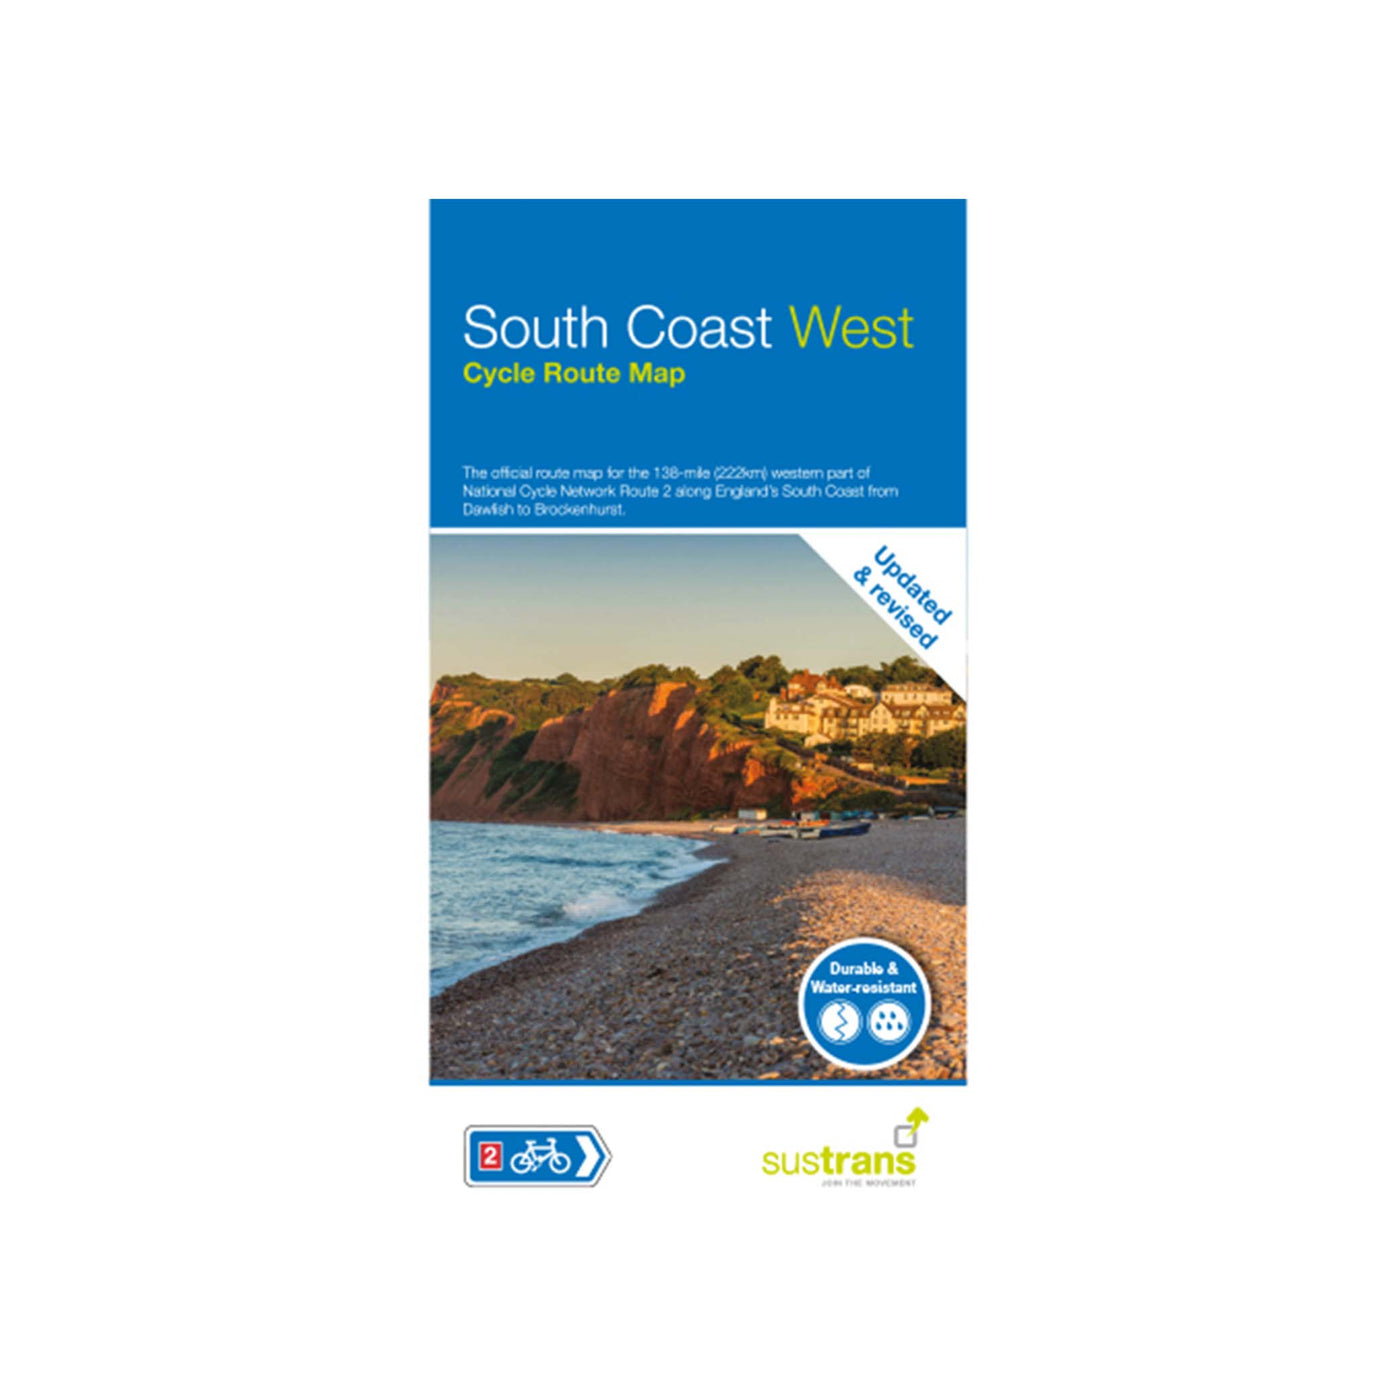 South Coast West cycle route map - Dawlish to Brockenhurst - water resistant map 